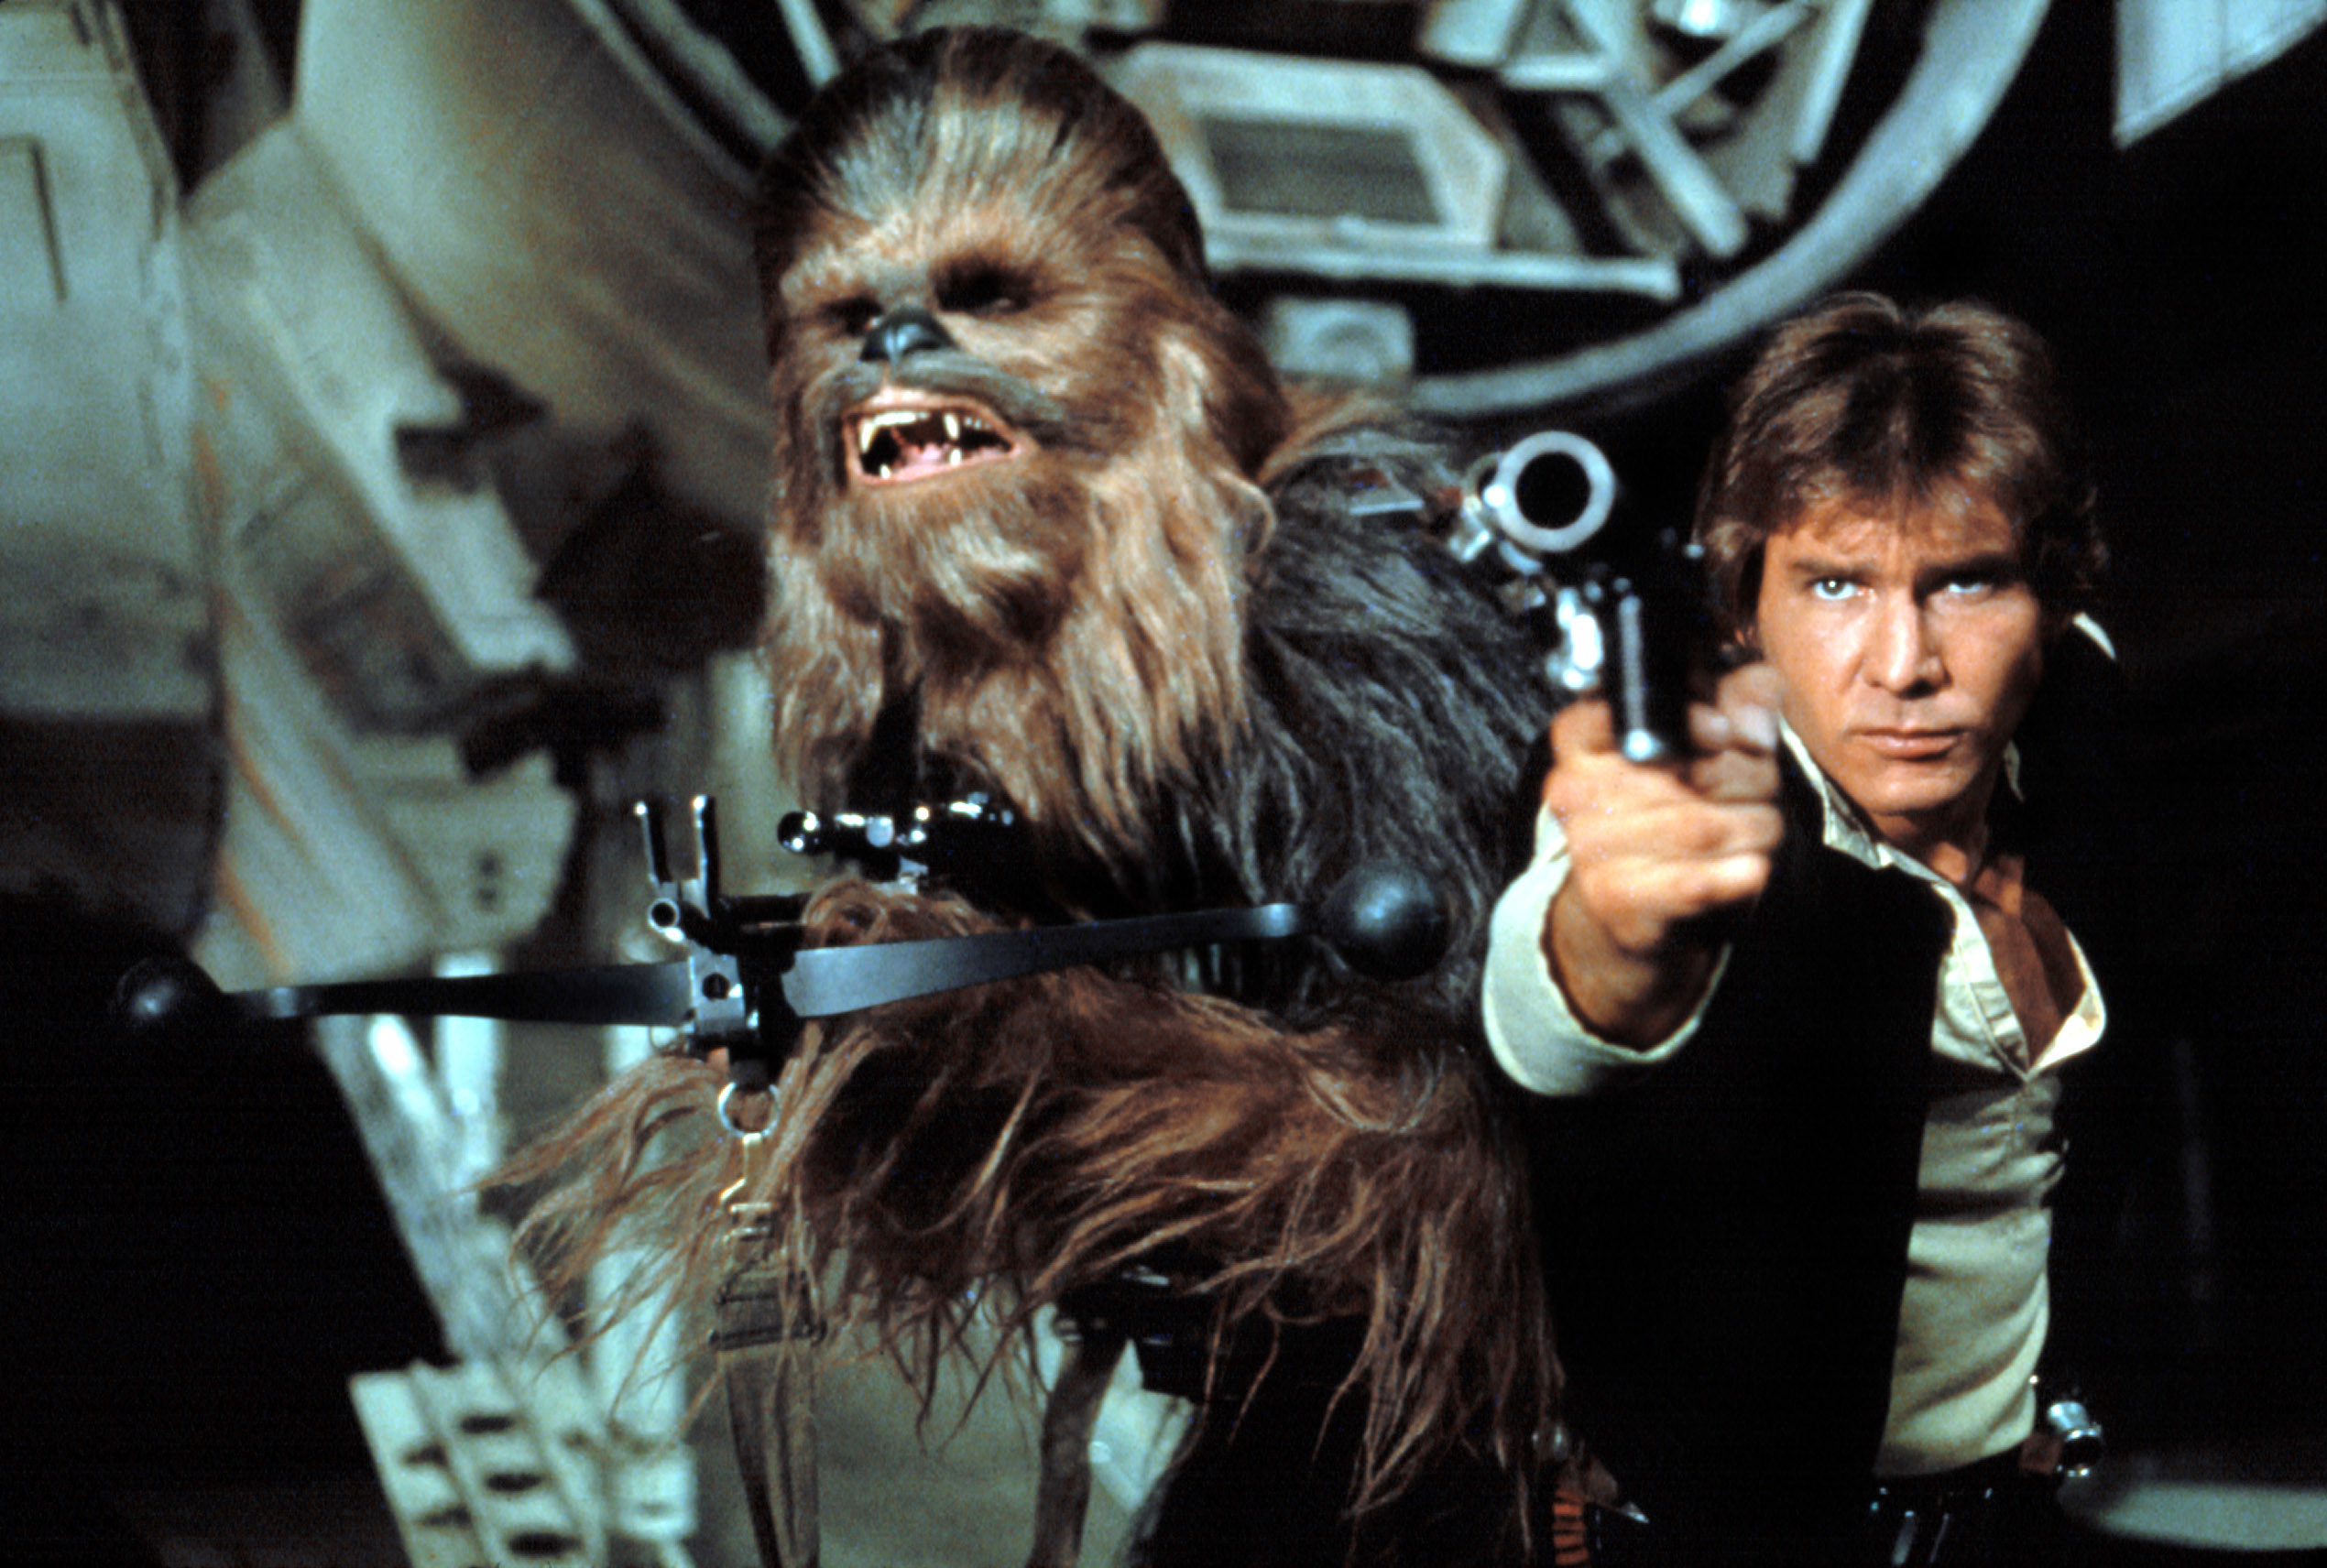 Chewbacca and Han Solo in one of the original Star Wars movies